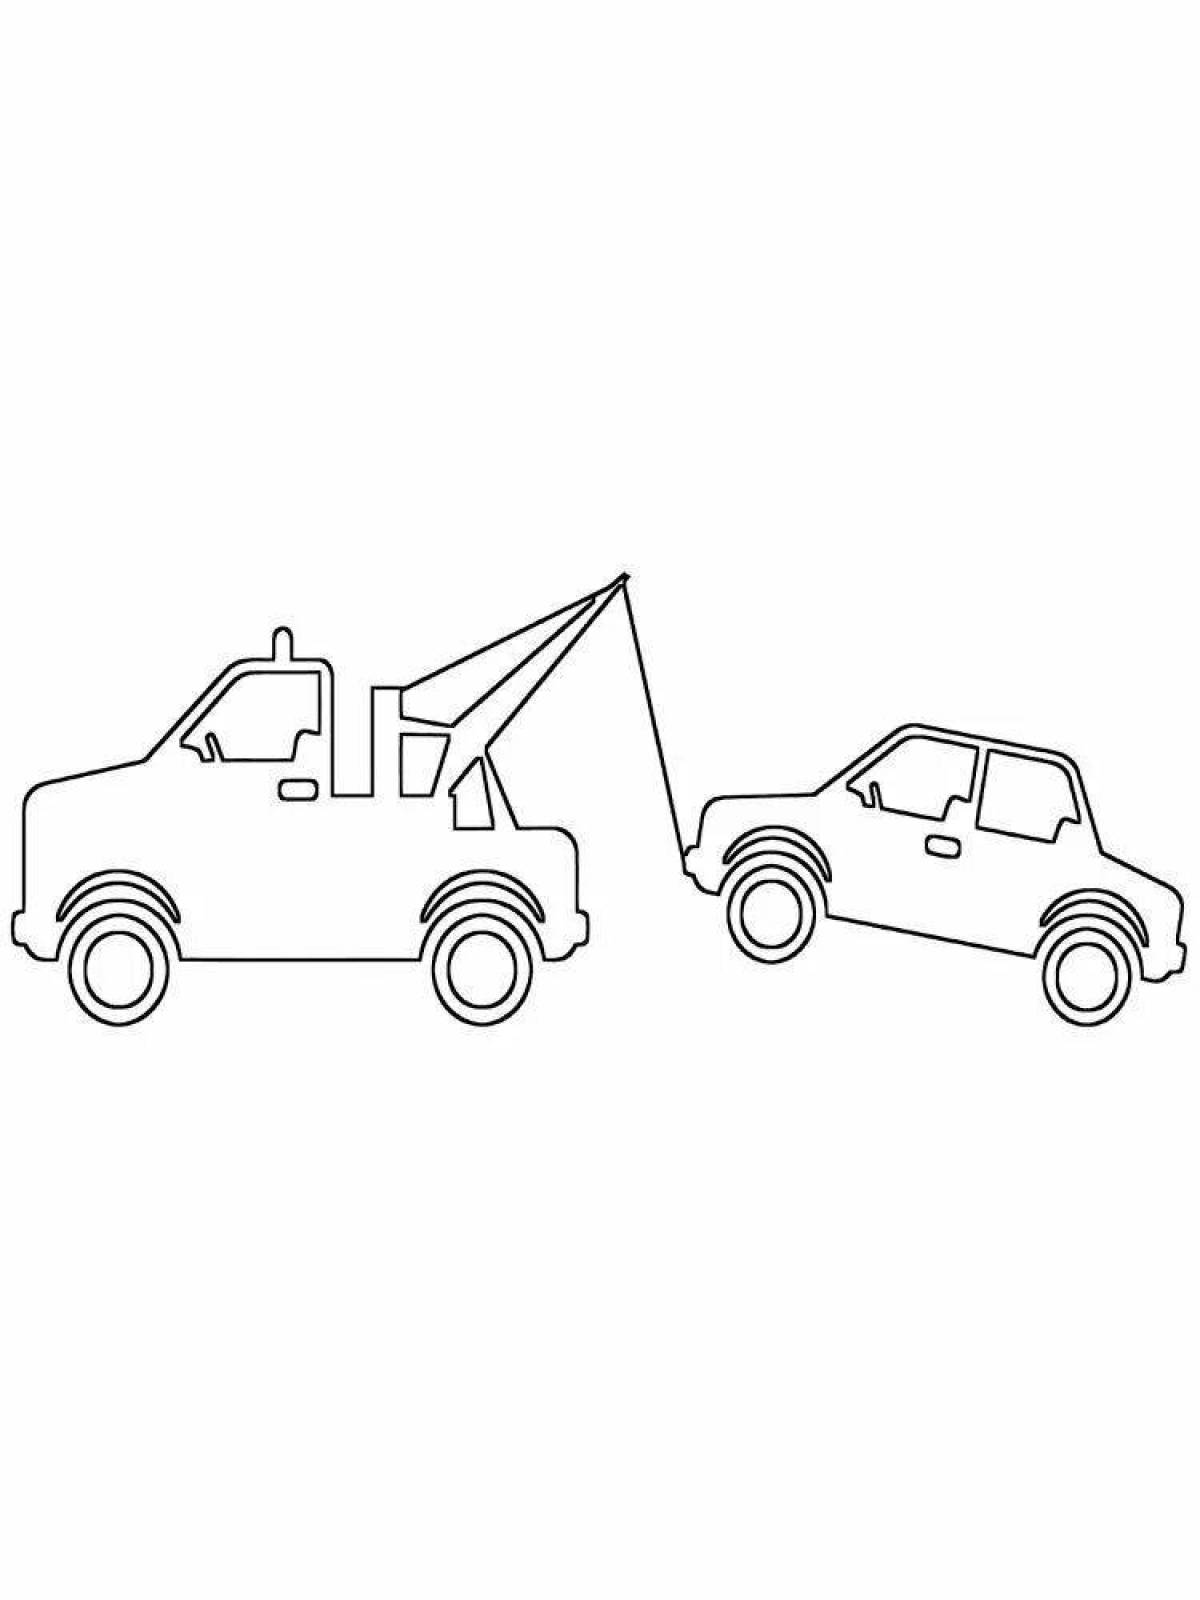 Cute tow truck coloring page for kids